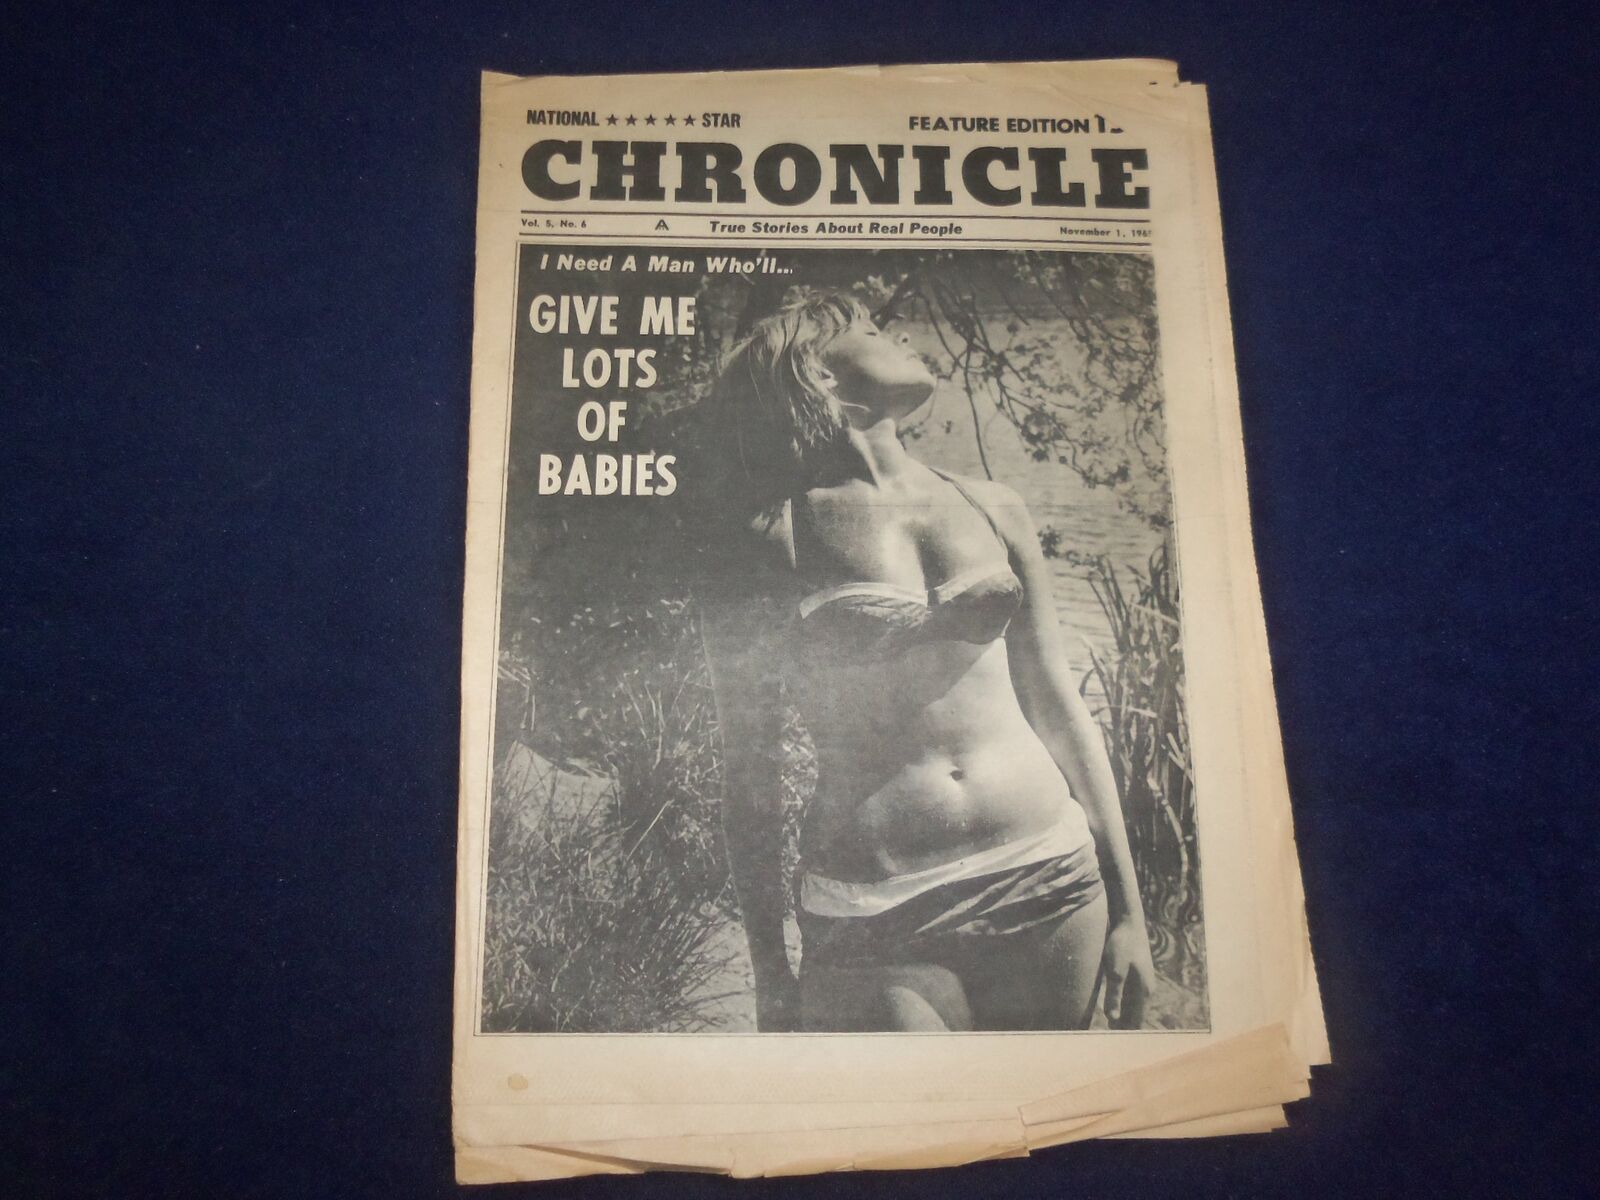 1965 NOV 1 NATIONAL STAR CHRONICLE NEWSPAPER - GIVE ME LOTS OF BABIES - NP 6897